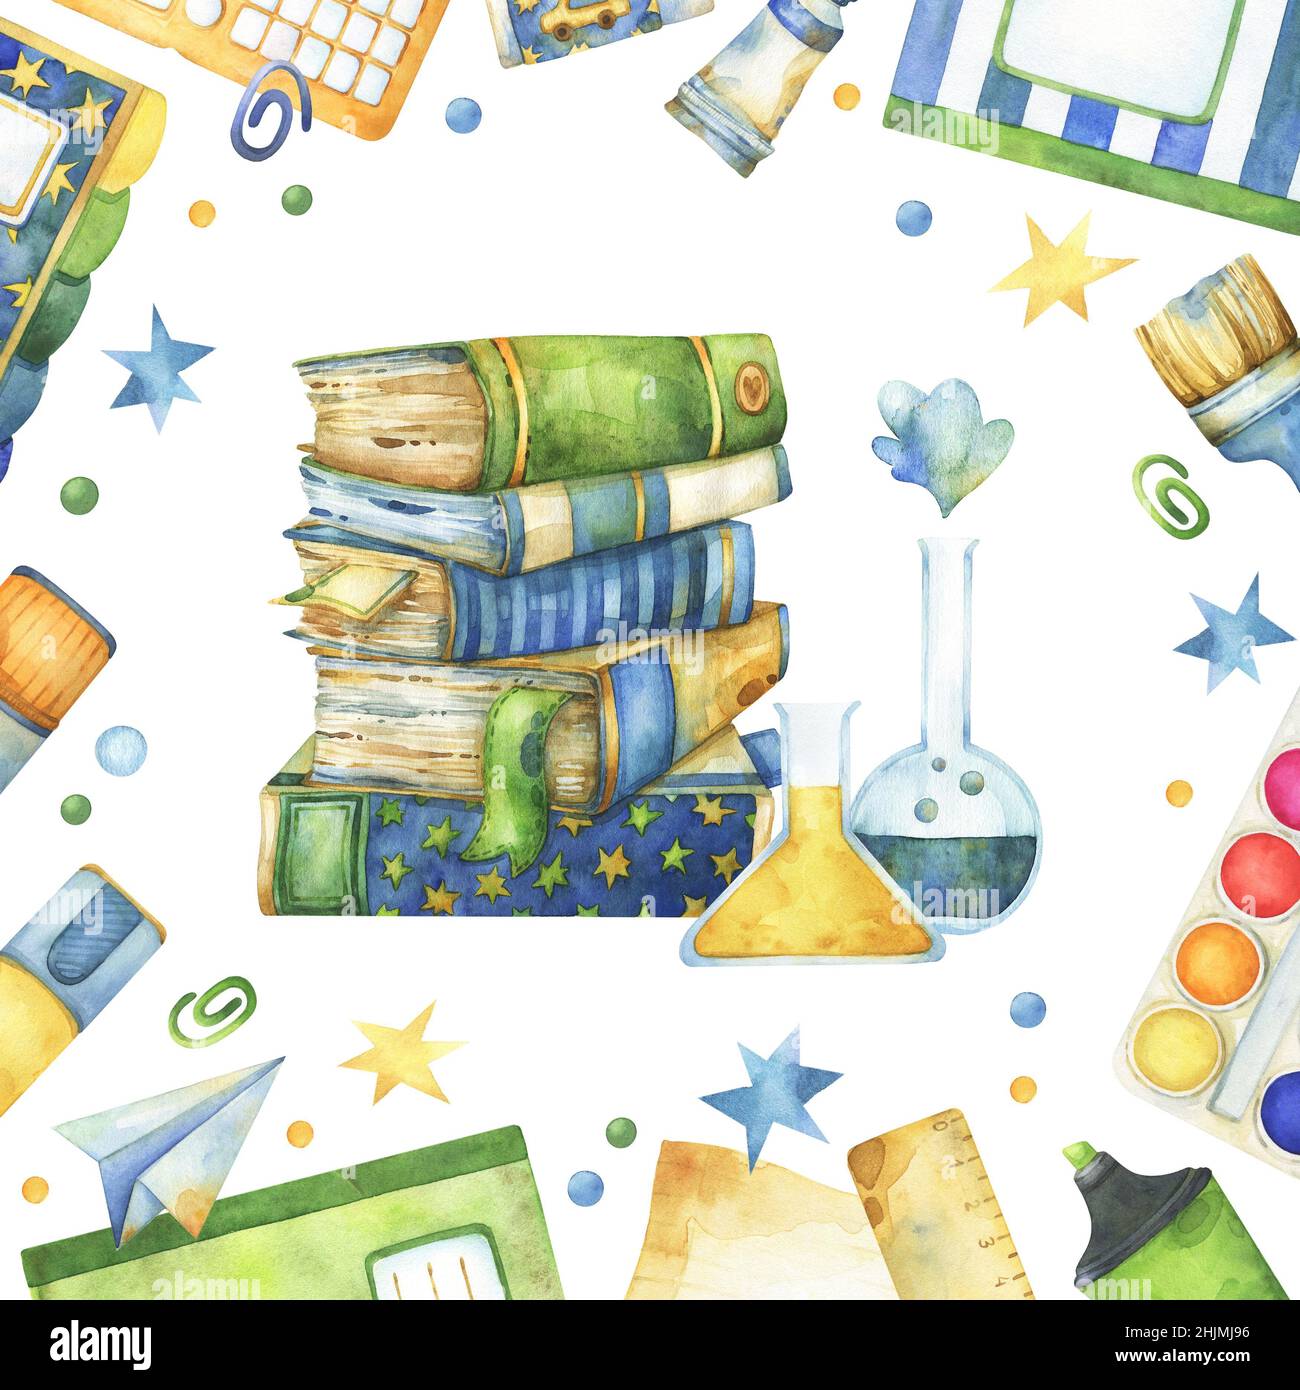 Watercolor stationery items and school supplies clipart frame, including  notebook, art and craft items, stars, brushes graphics, with a stack of  books Stock Photo - Alamy